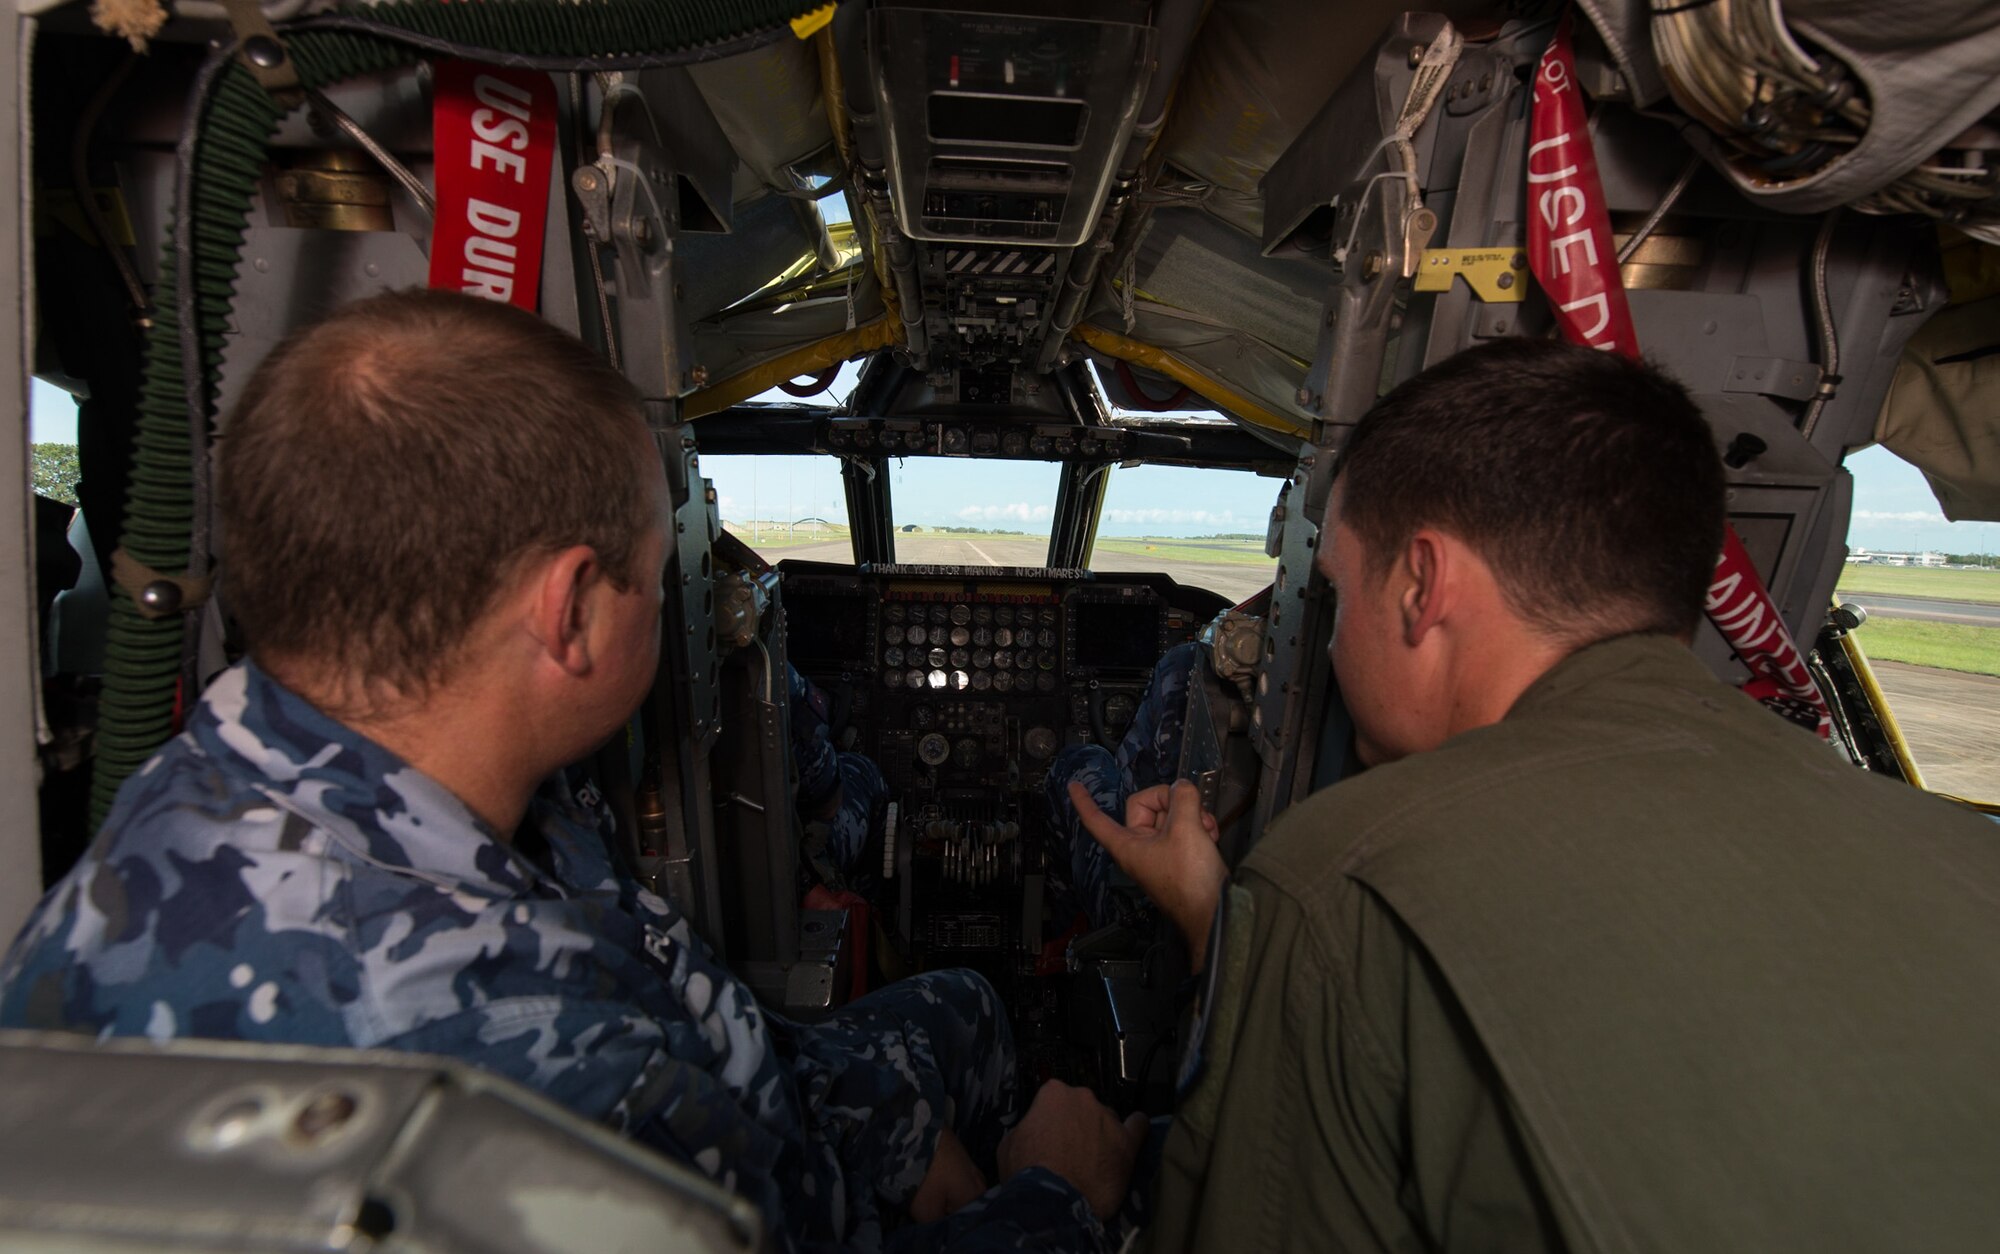 U.S. forces intergrate with Australian during EAC at RAAF base Darwin